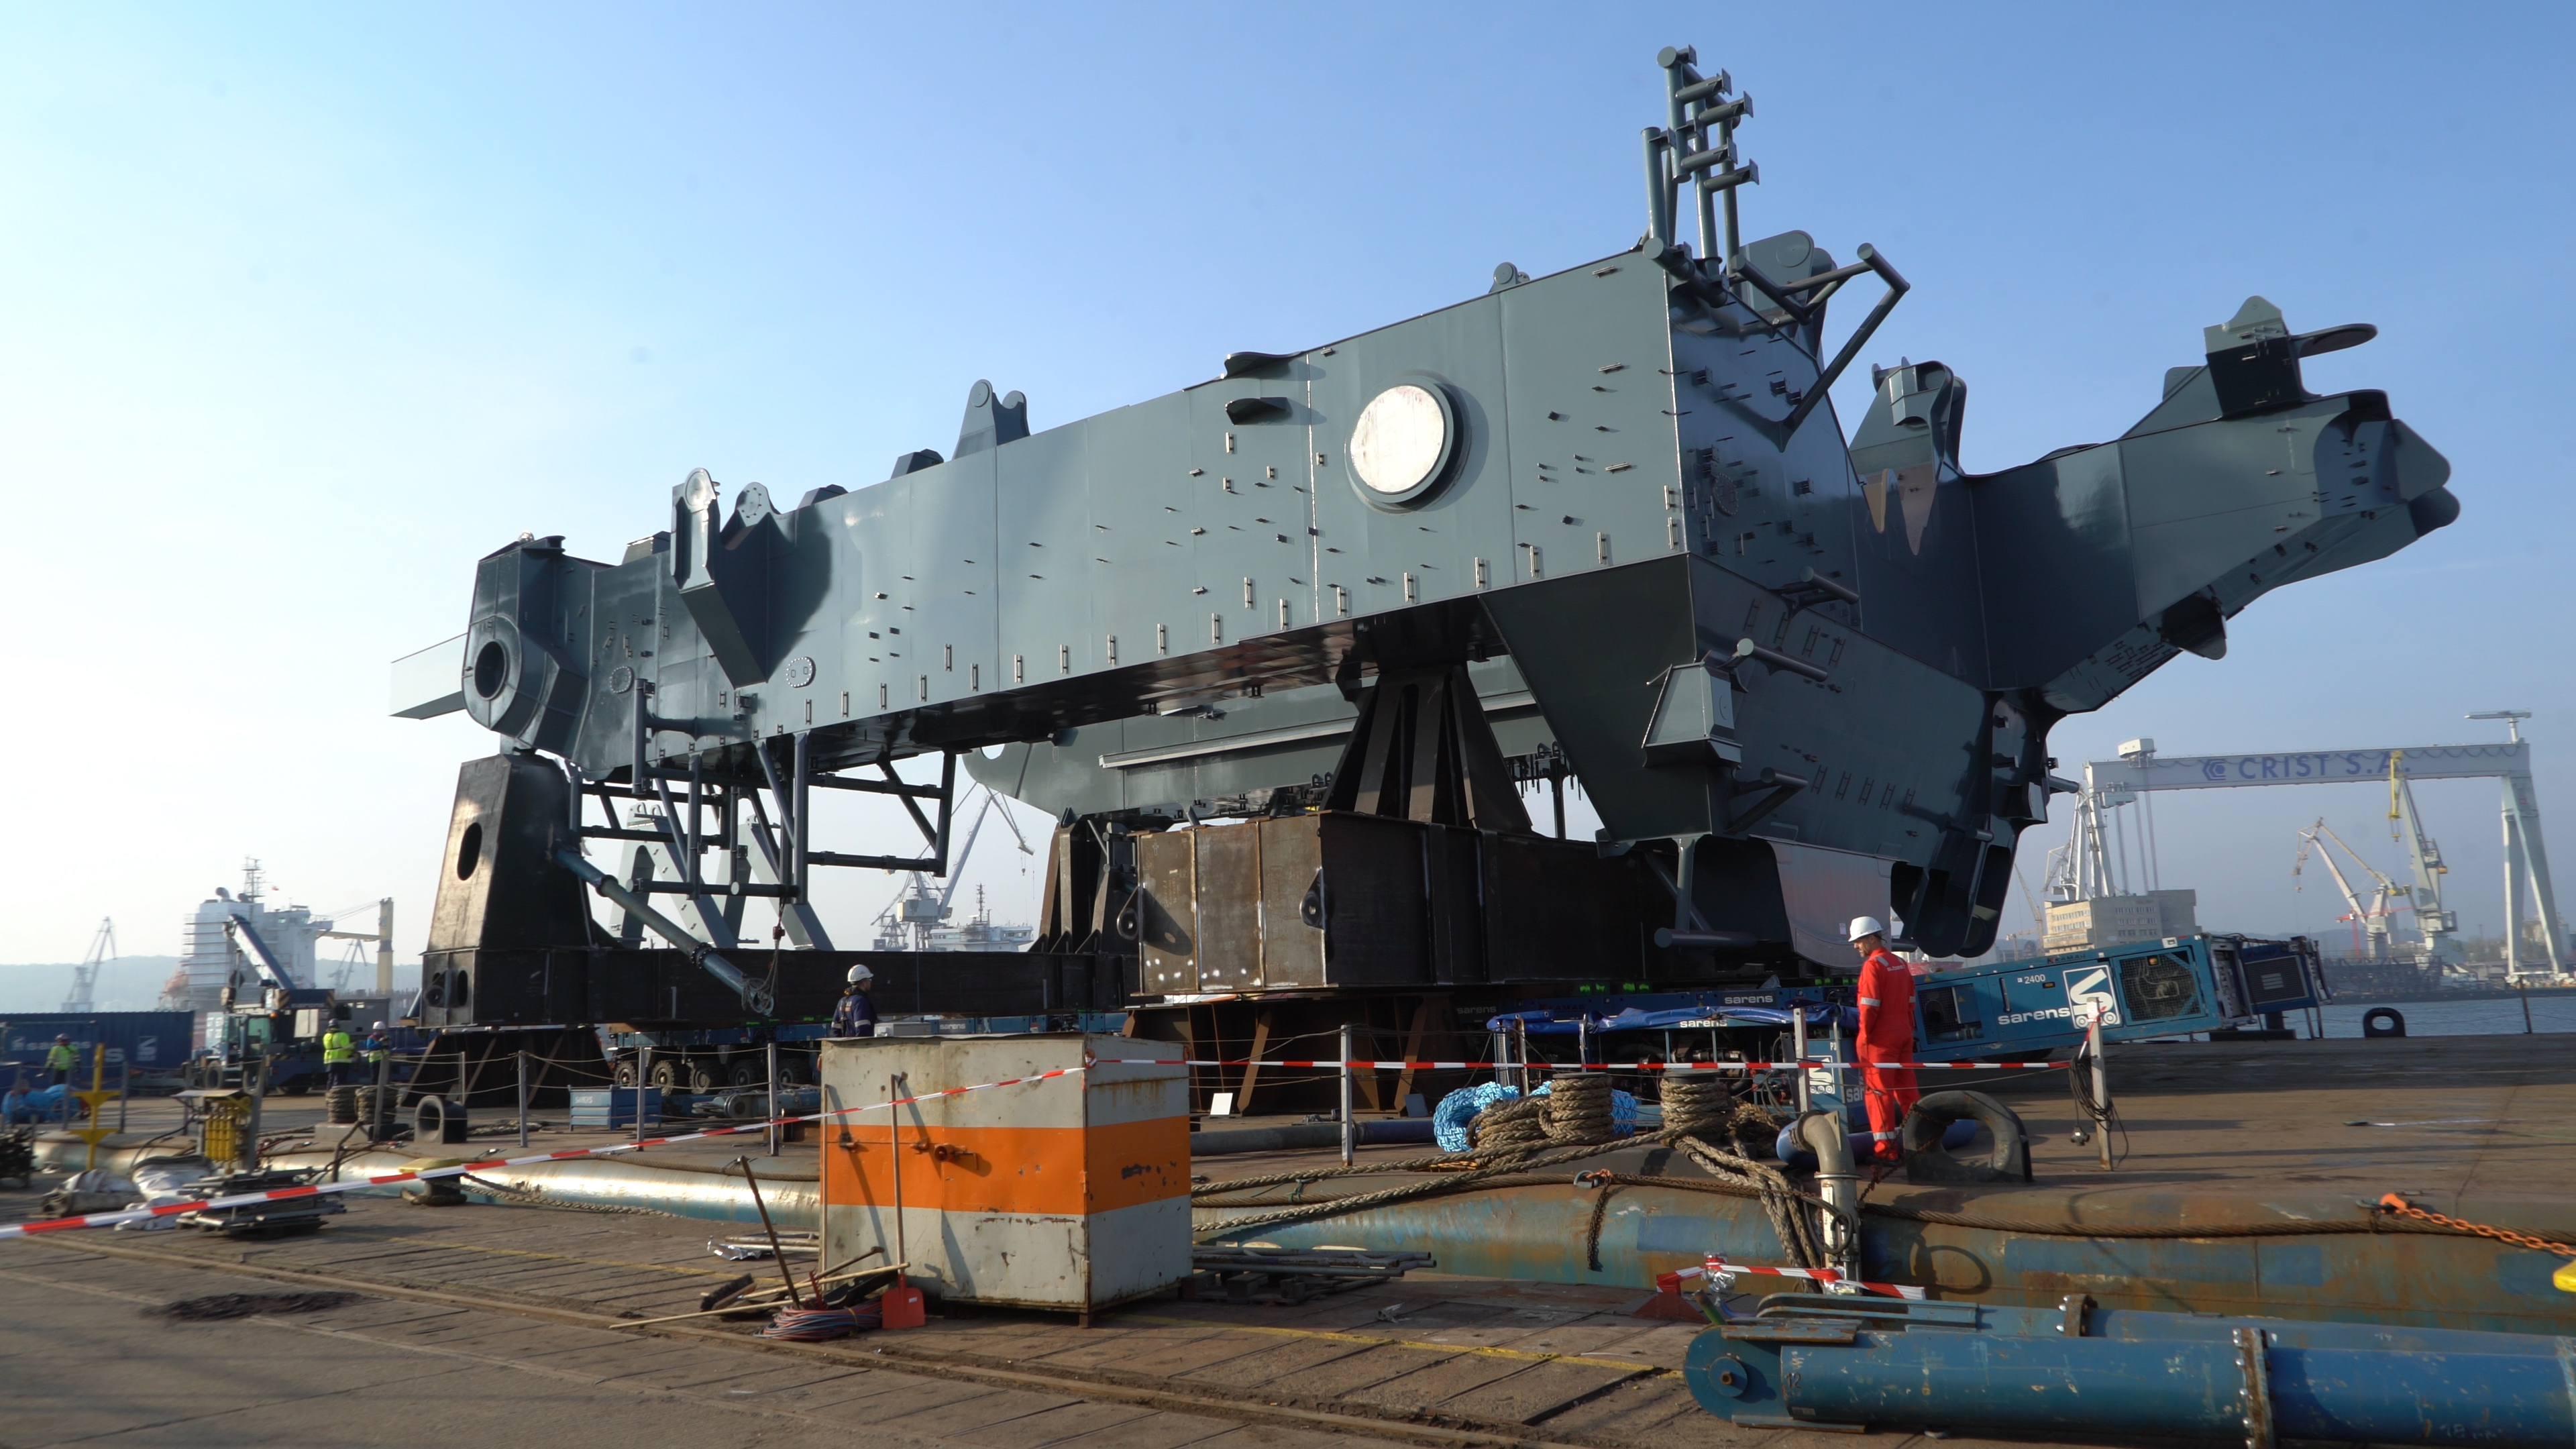 EPG produced four large-sized steel constructions for english ship owner - MarinePoland.com